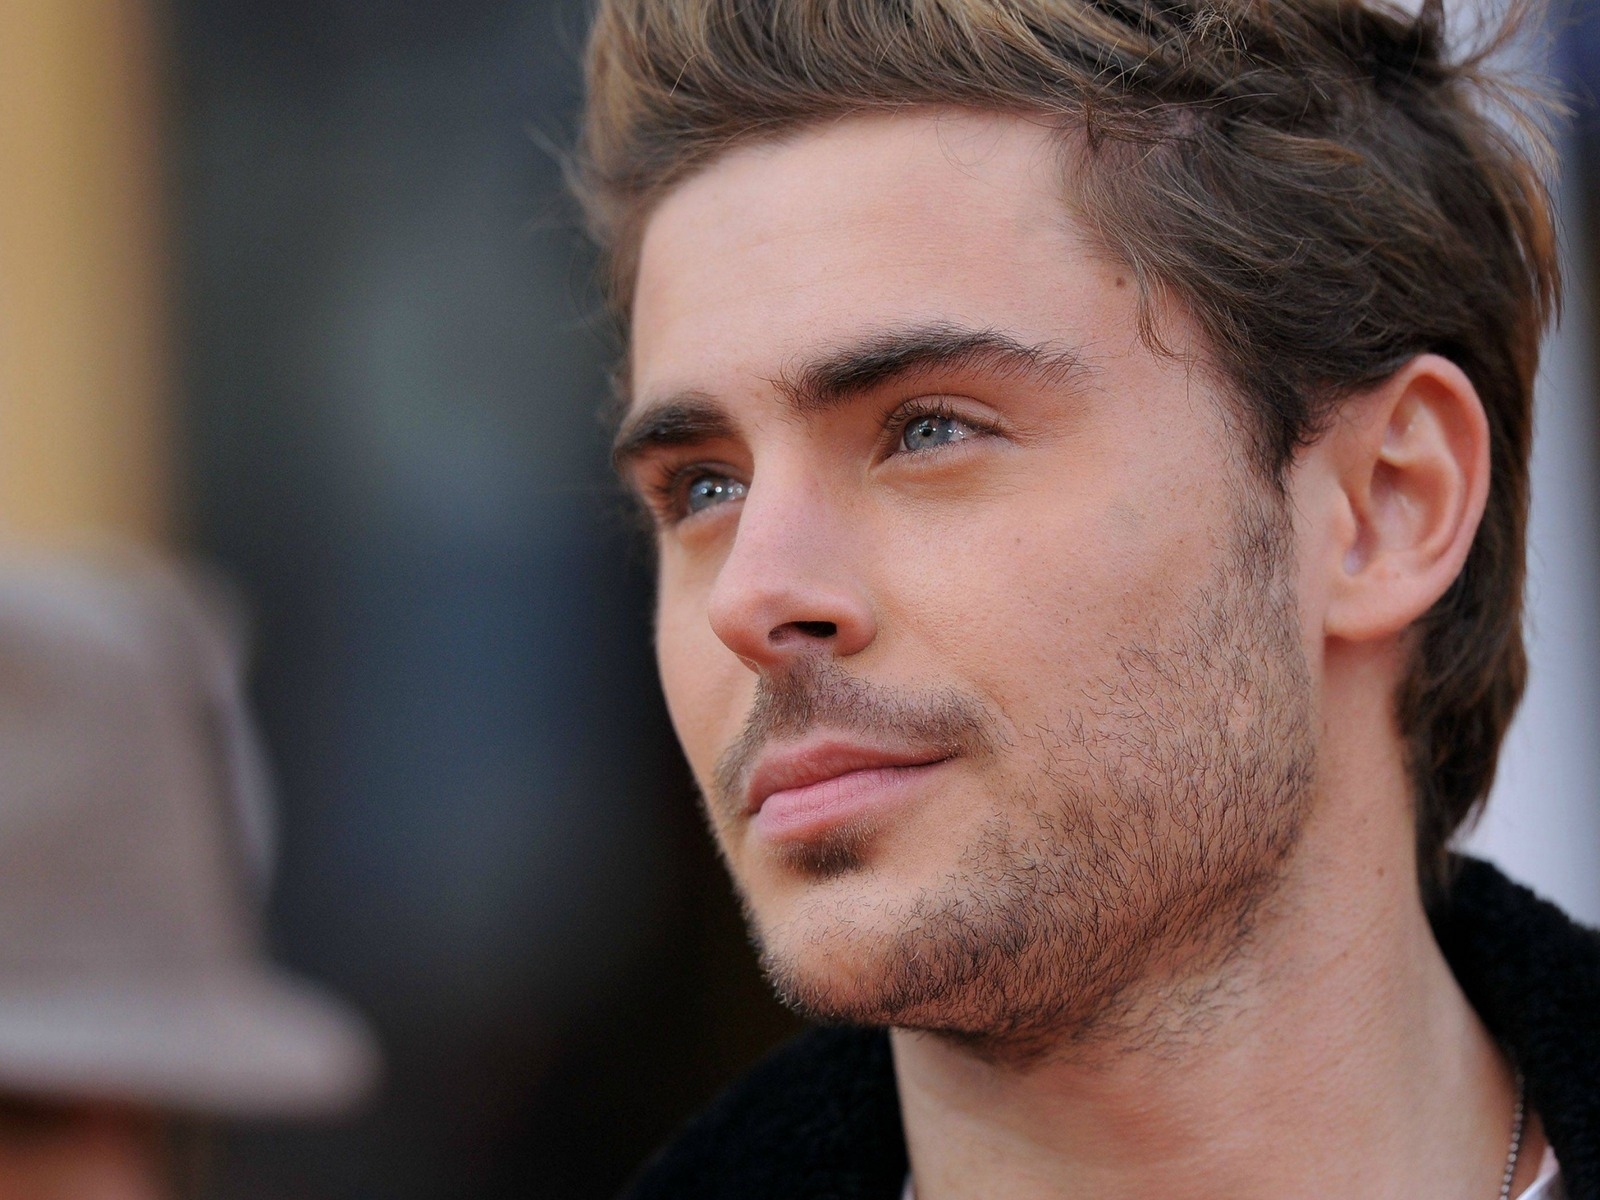 Zac Efron Actor for 1600 x 1200 resolution